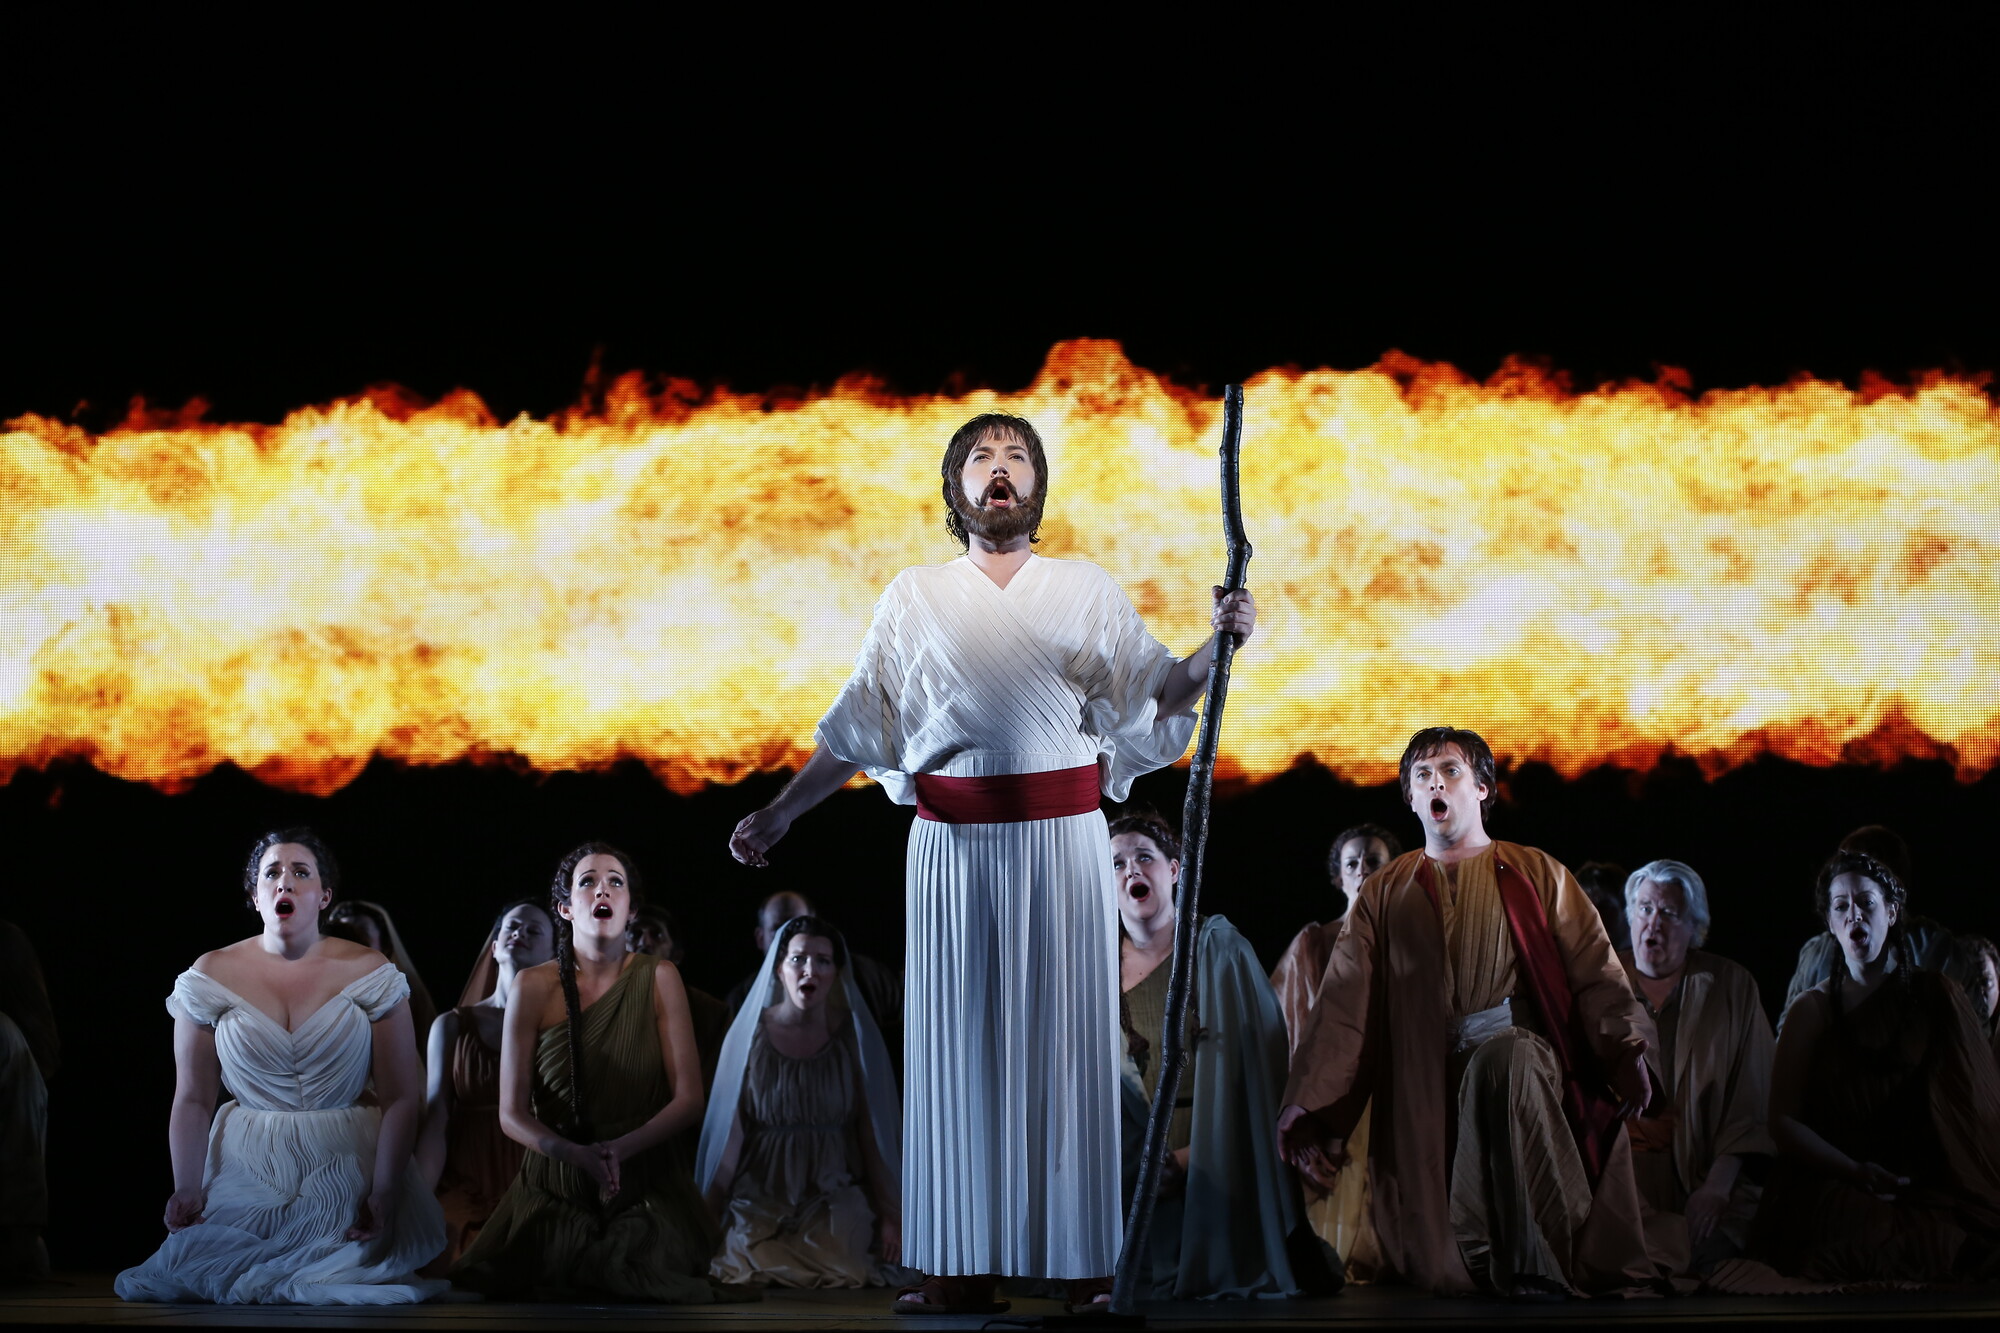 A performer holding a staff sings in front of many other kneeling performers, with a projected image of fire behind them.